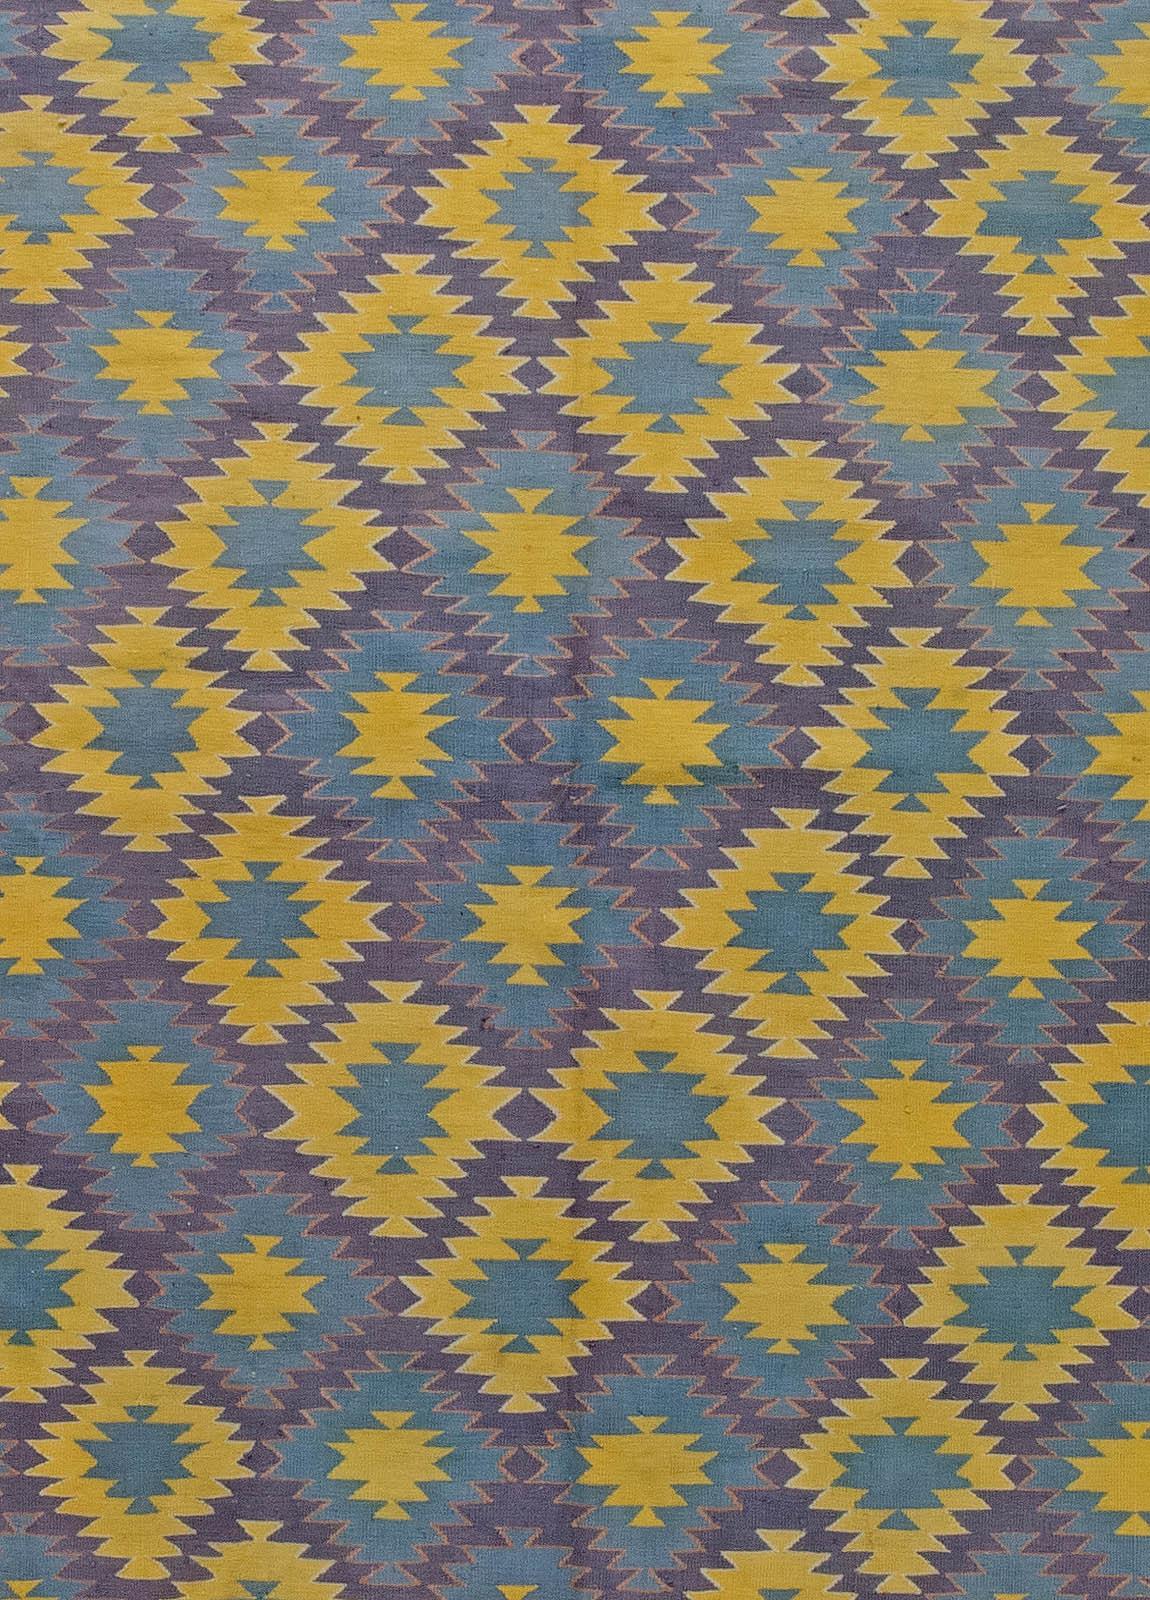 Oversized mid-20th century Indian Dhurrie blue, purple, yellow cotton rug
Size: 13'10